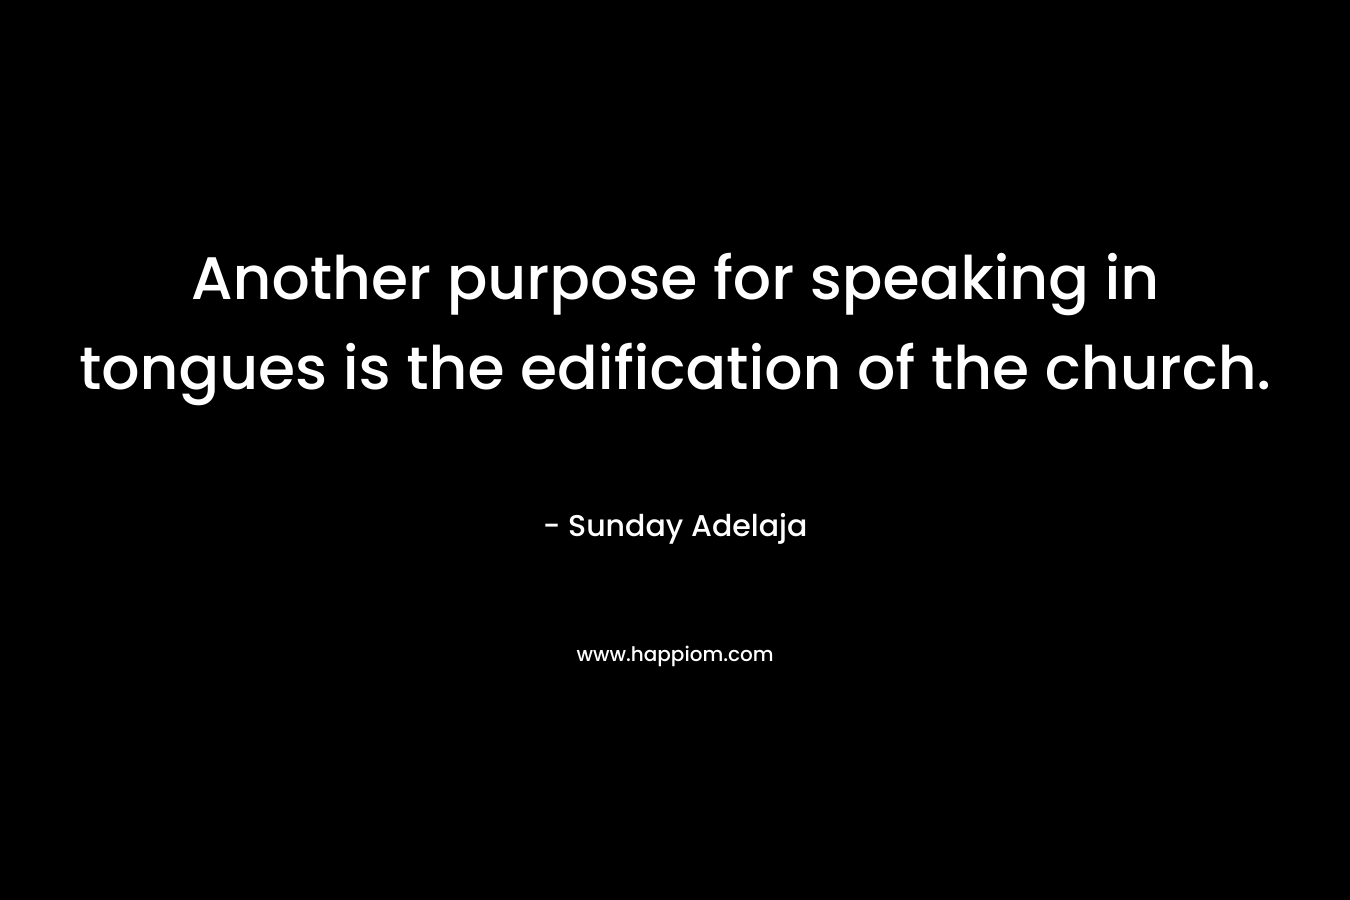 Another purpose for speaking in tongues is the edification of the church.